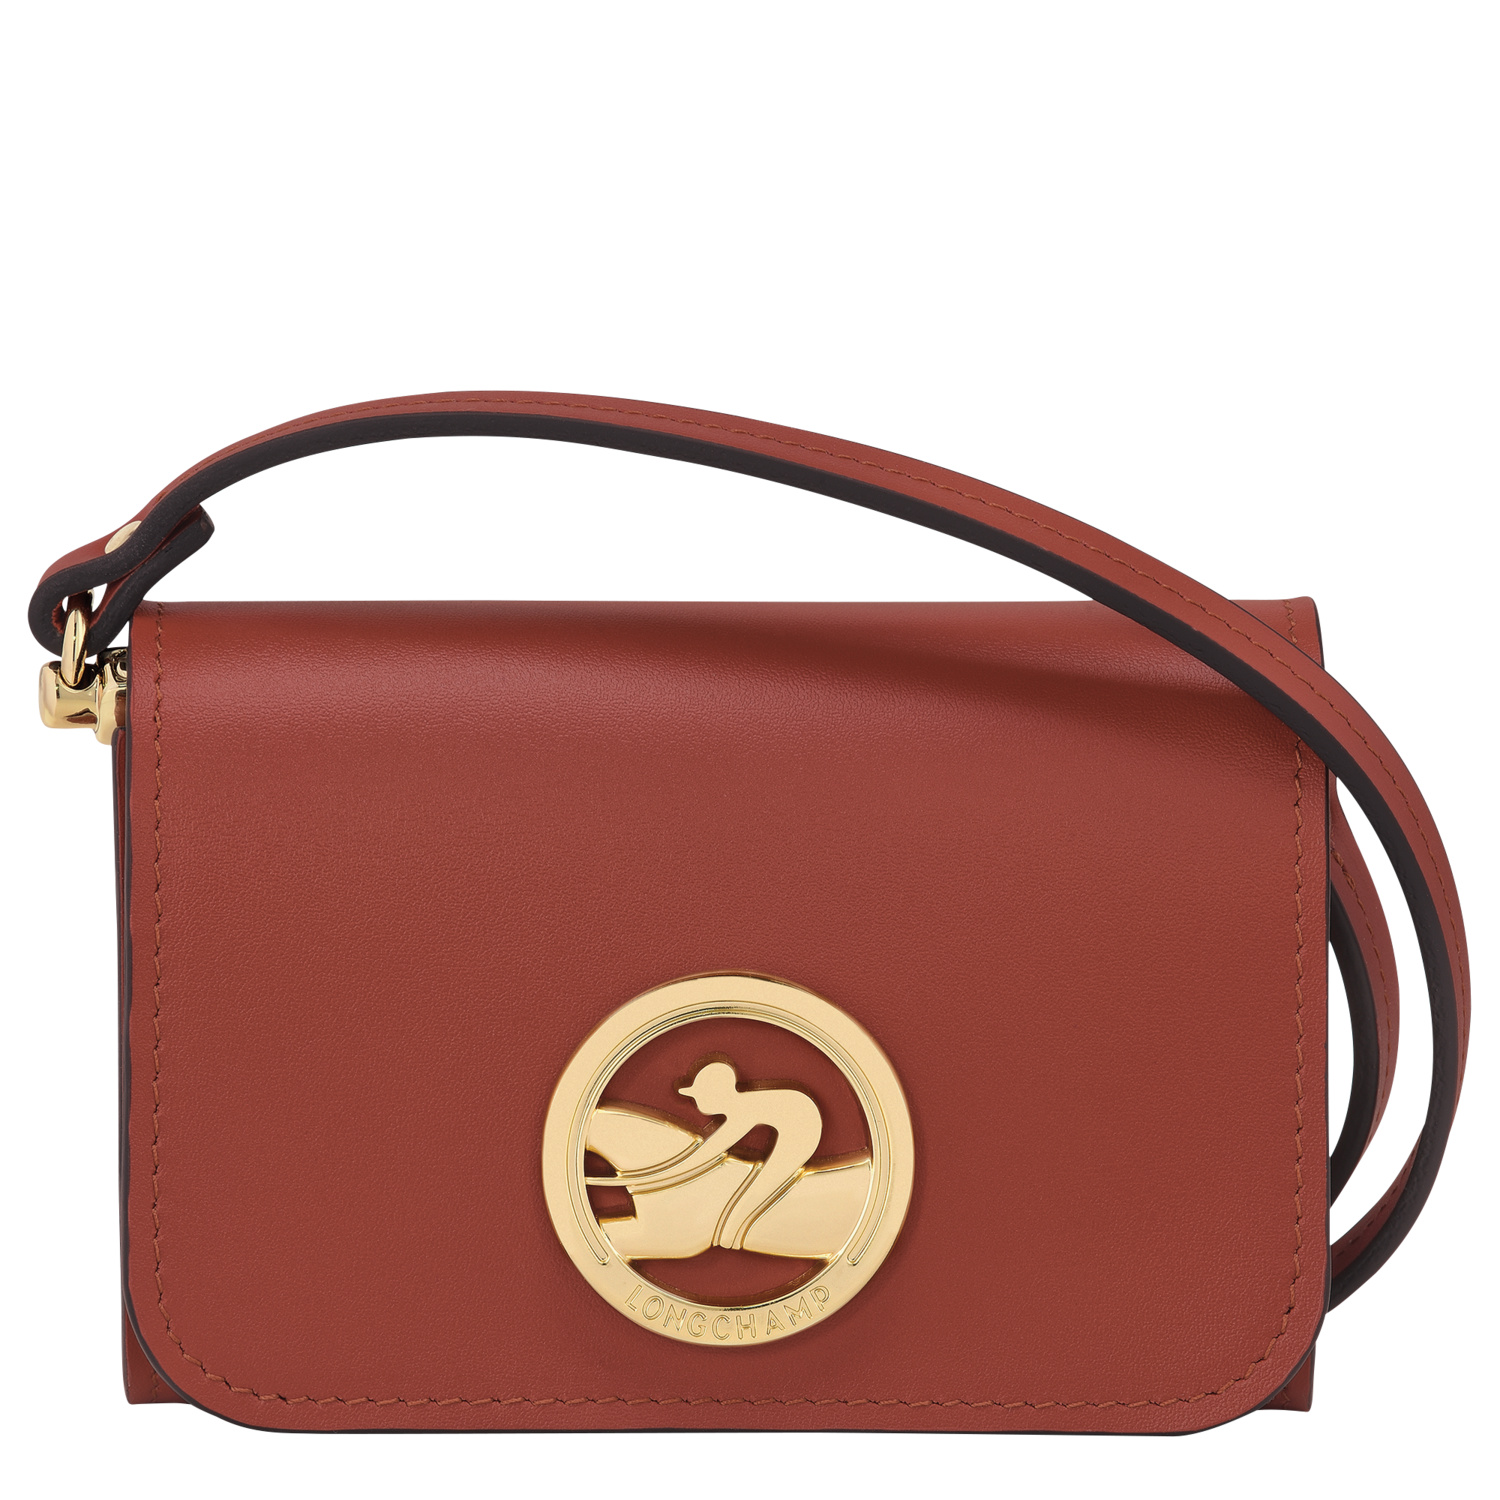 Longchamp Coin Purse With Shoulder Strap Box-trot In Mahogany